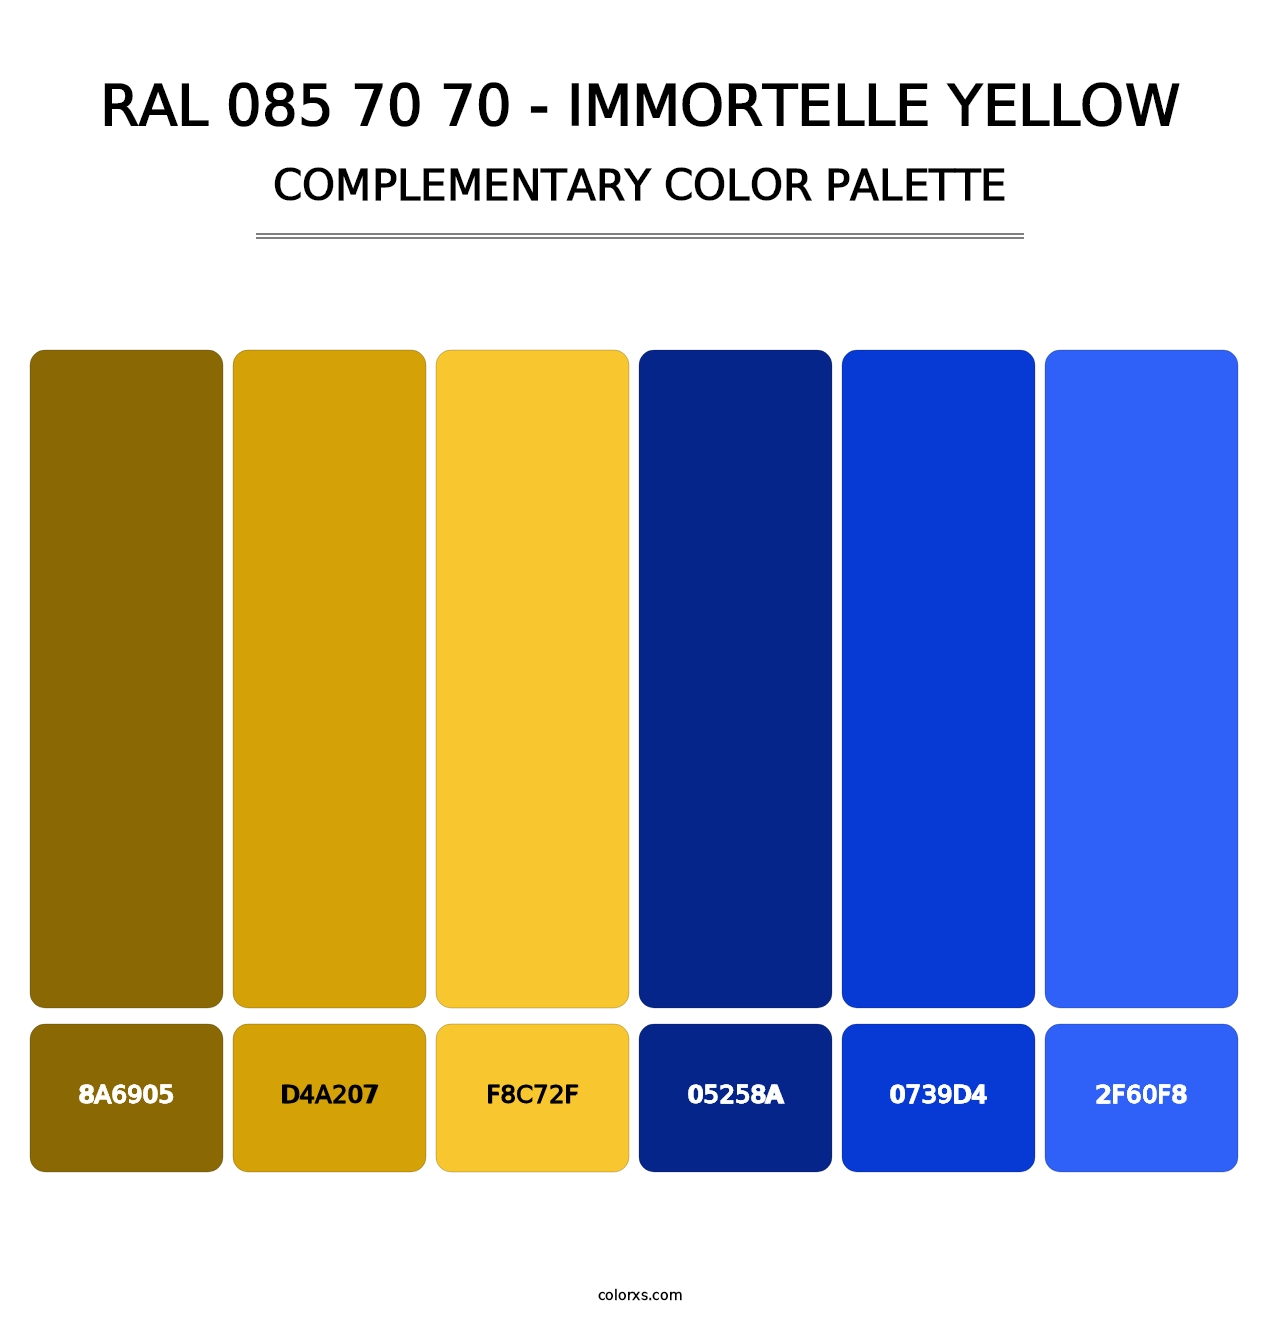 RAL 085 70 70 - Immortelle Yellow - Complementary Color Palette